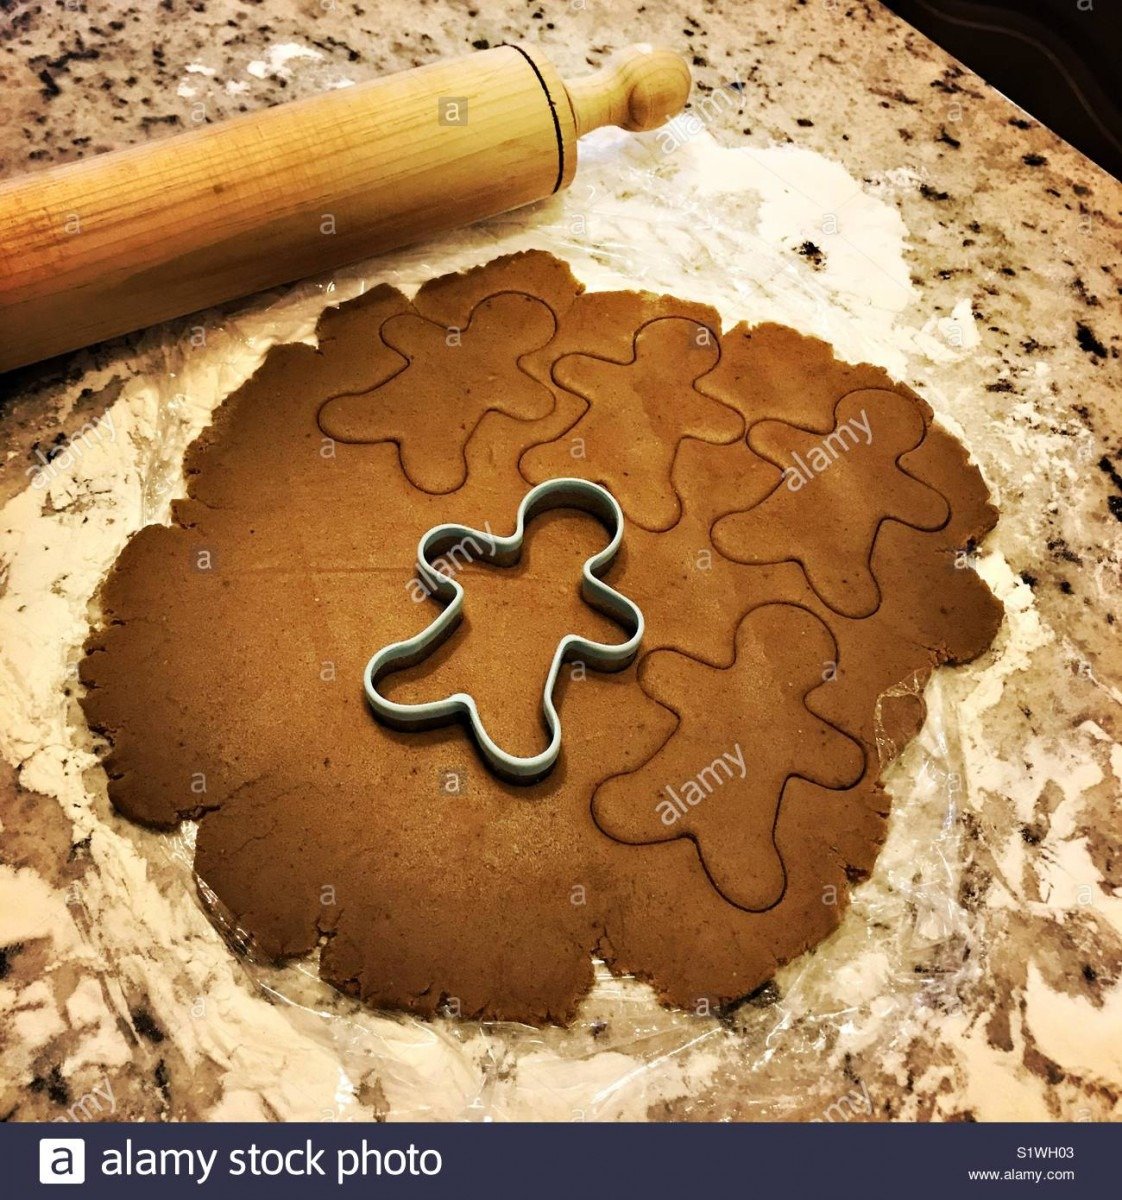 Gingerbread Cookie Dough Is Rolled Out On A Marble Counter With A